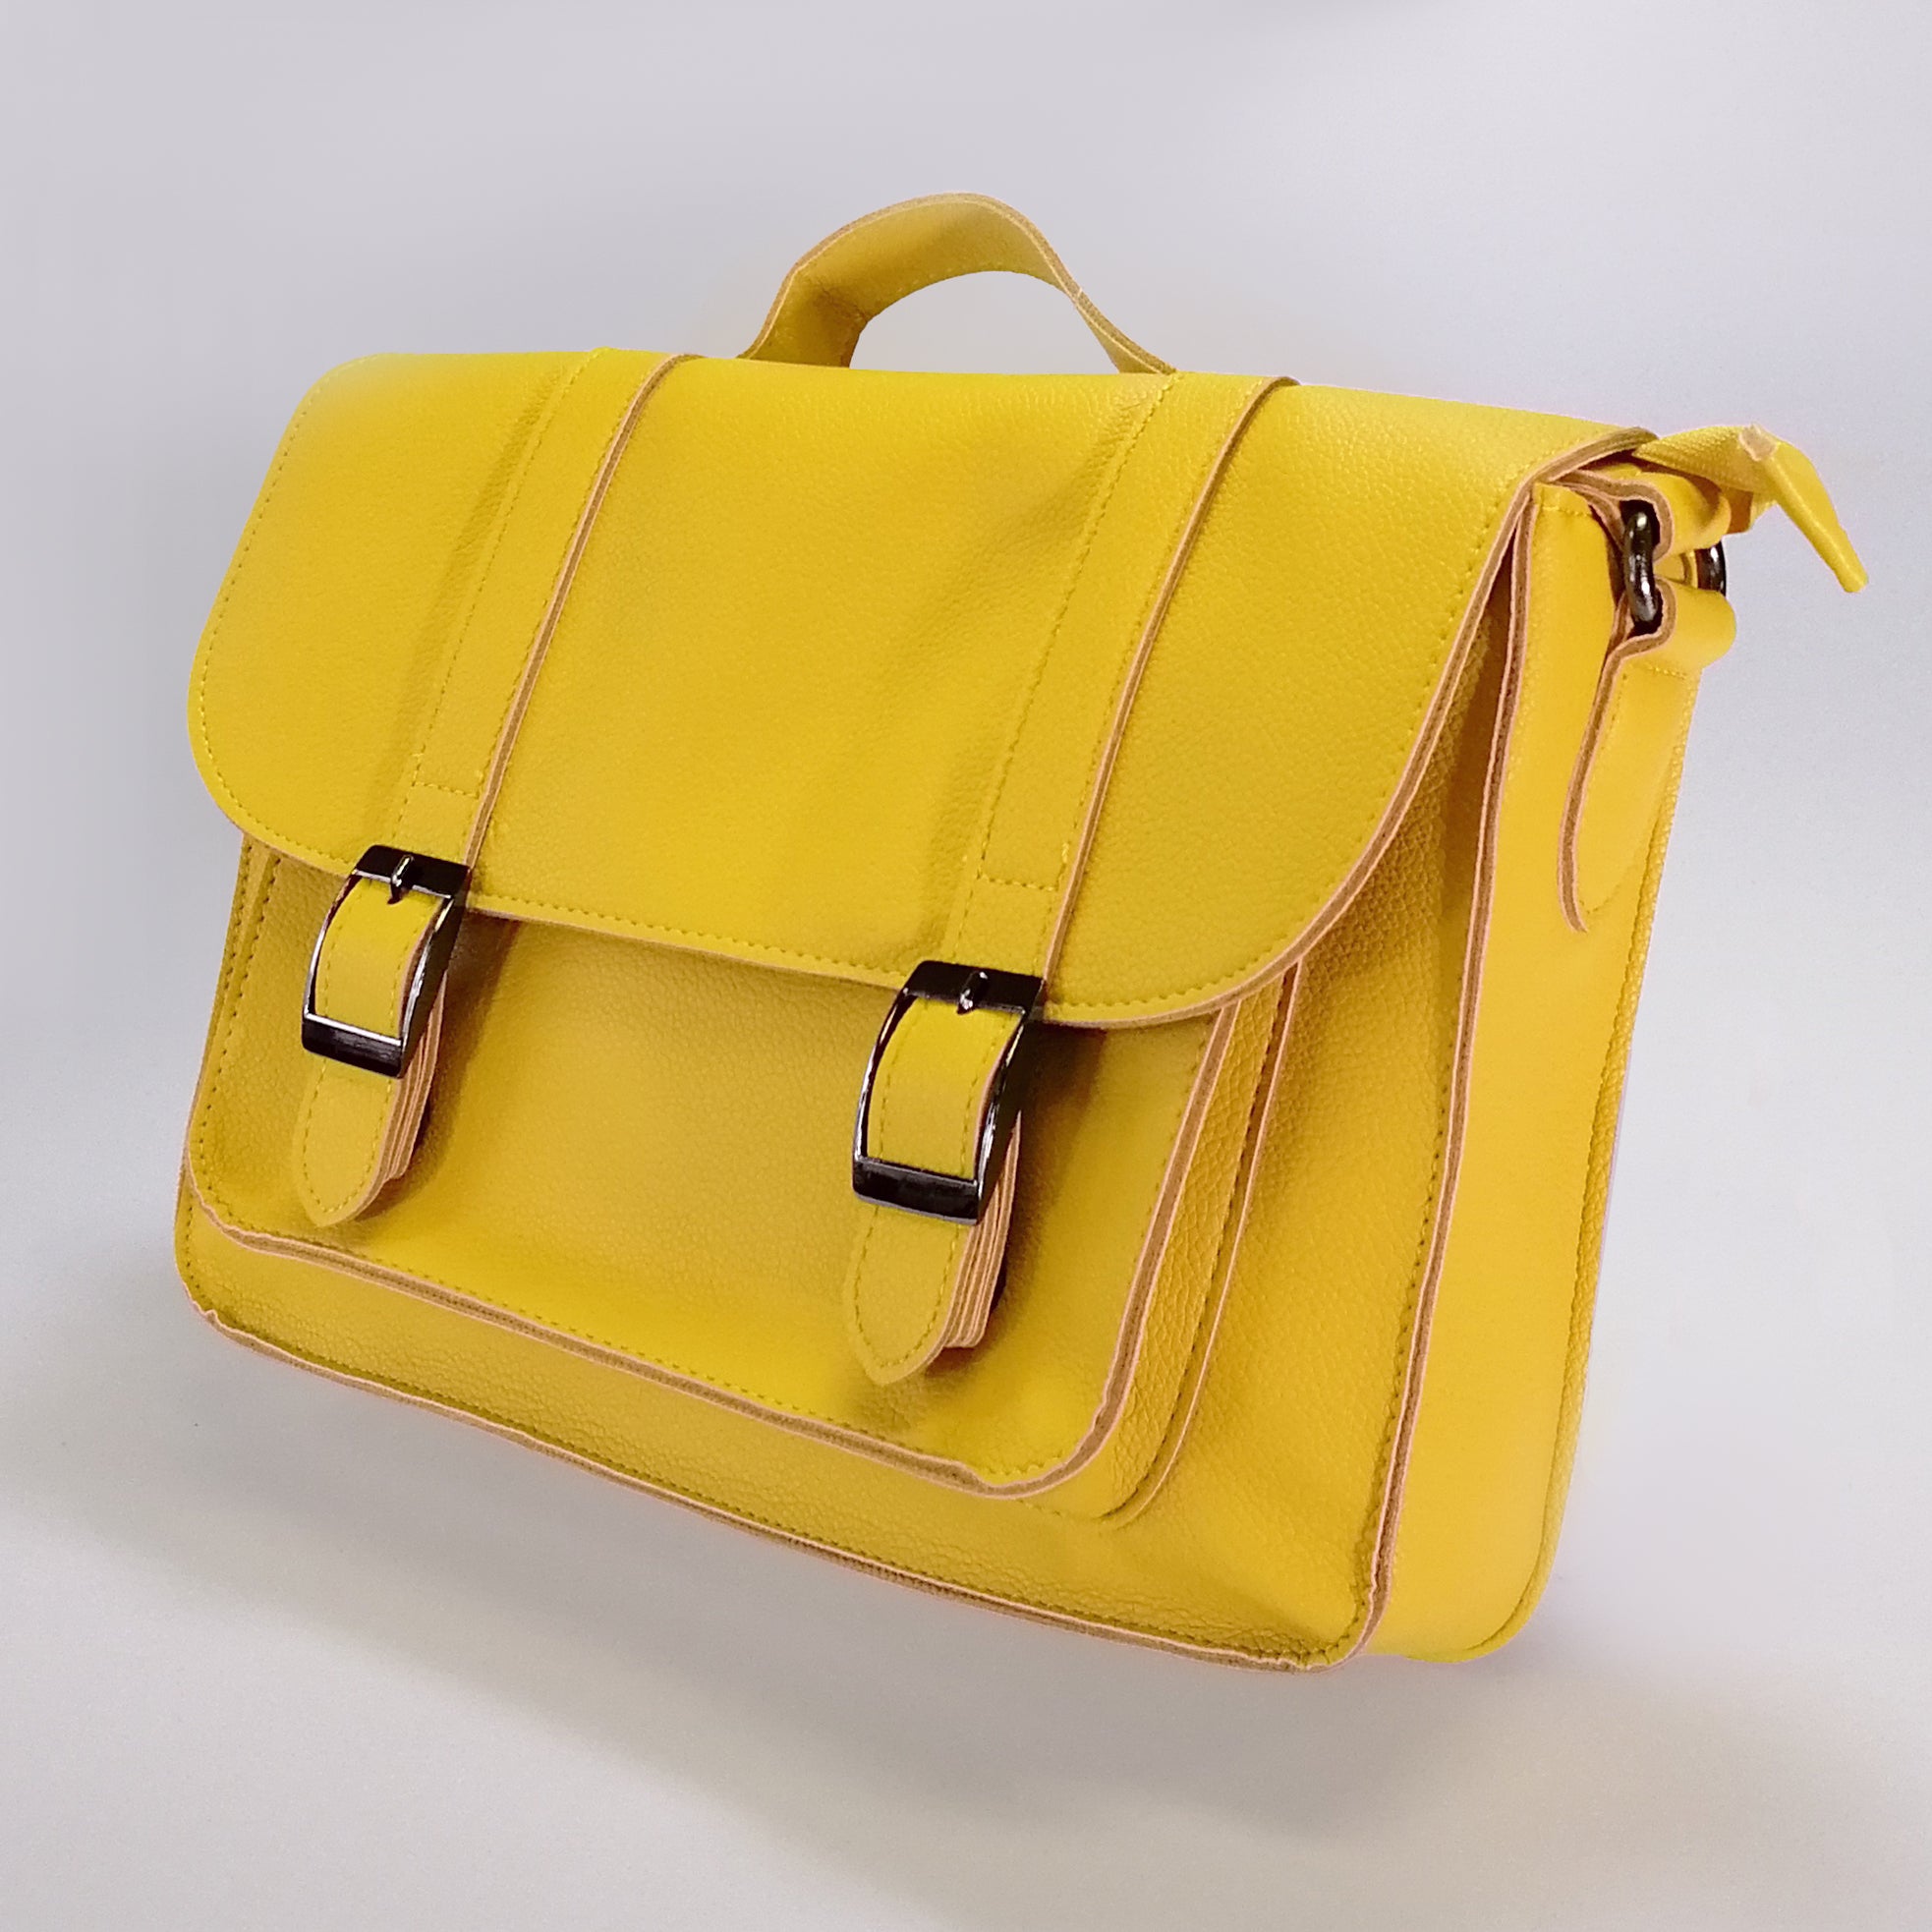 The Primary School Bag - Buttercup Yellow